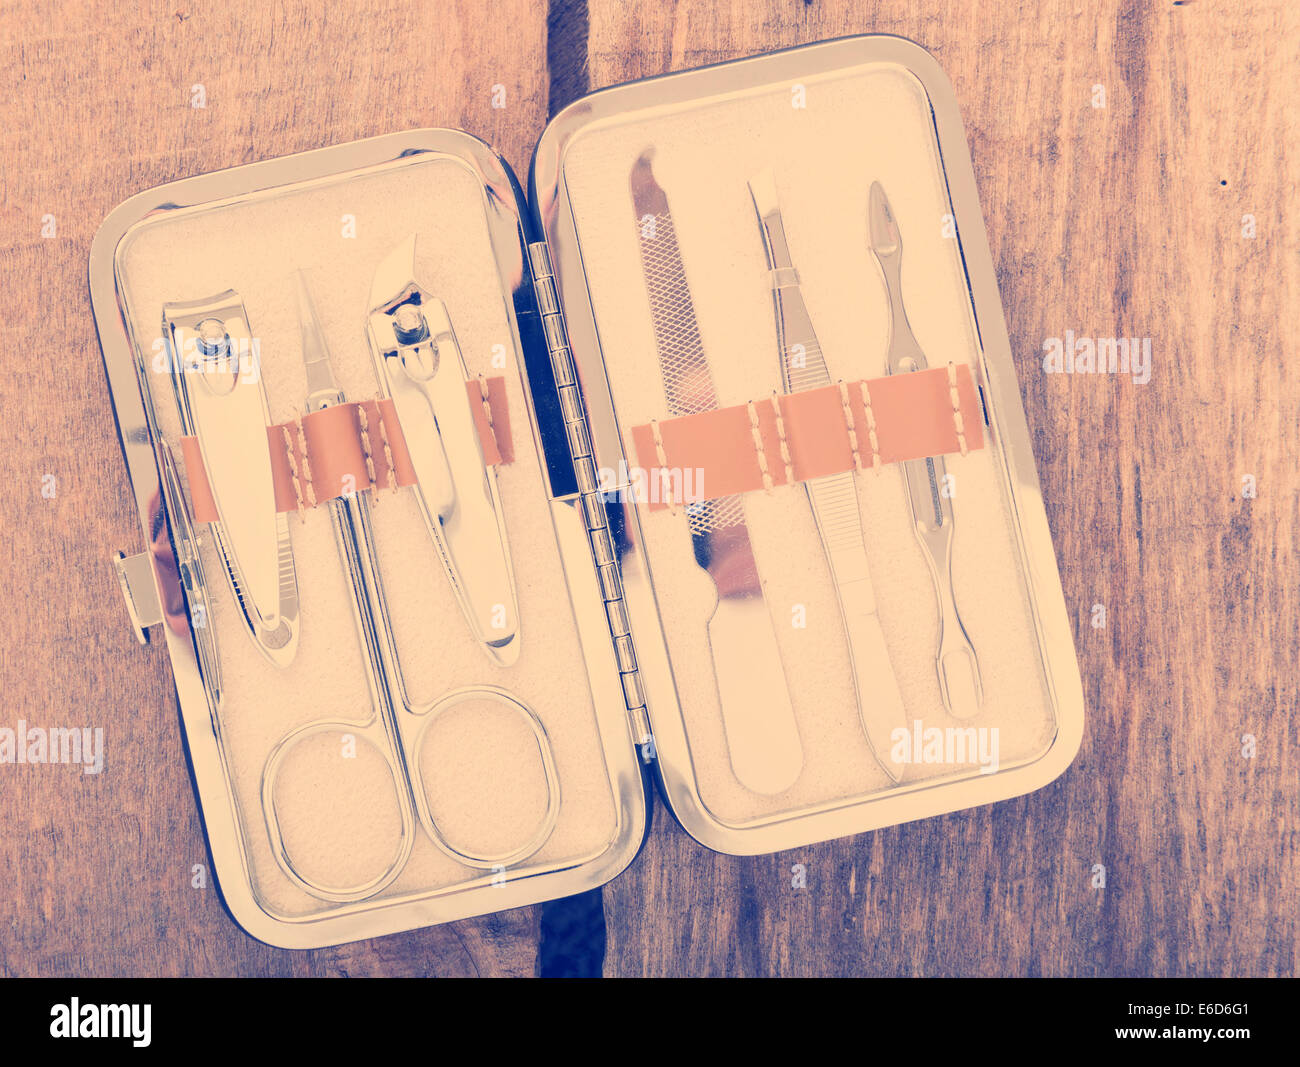 Classic metal kit of nail scissors and manicure tools on wooden background with vintage filter Stock Photo